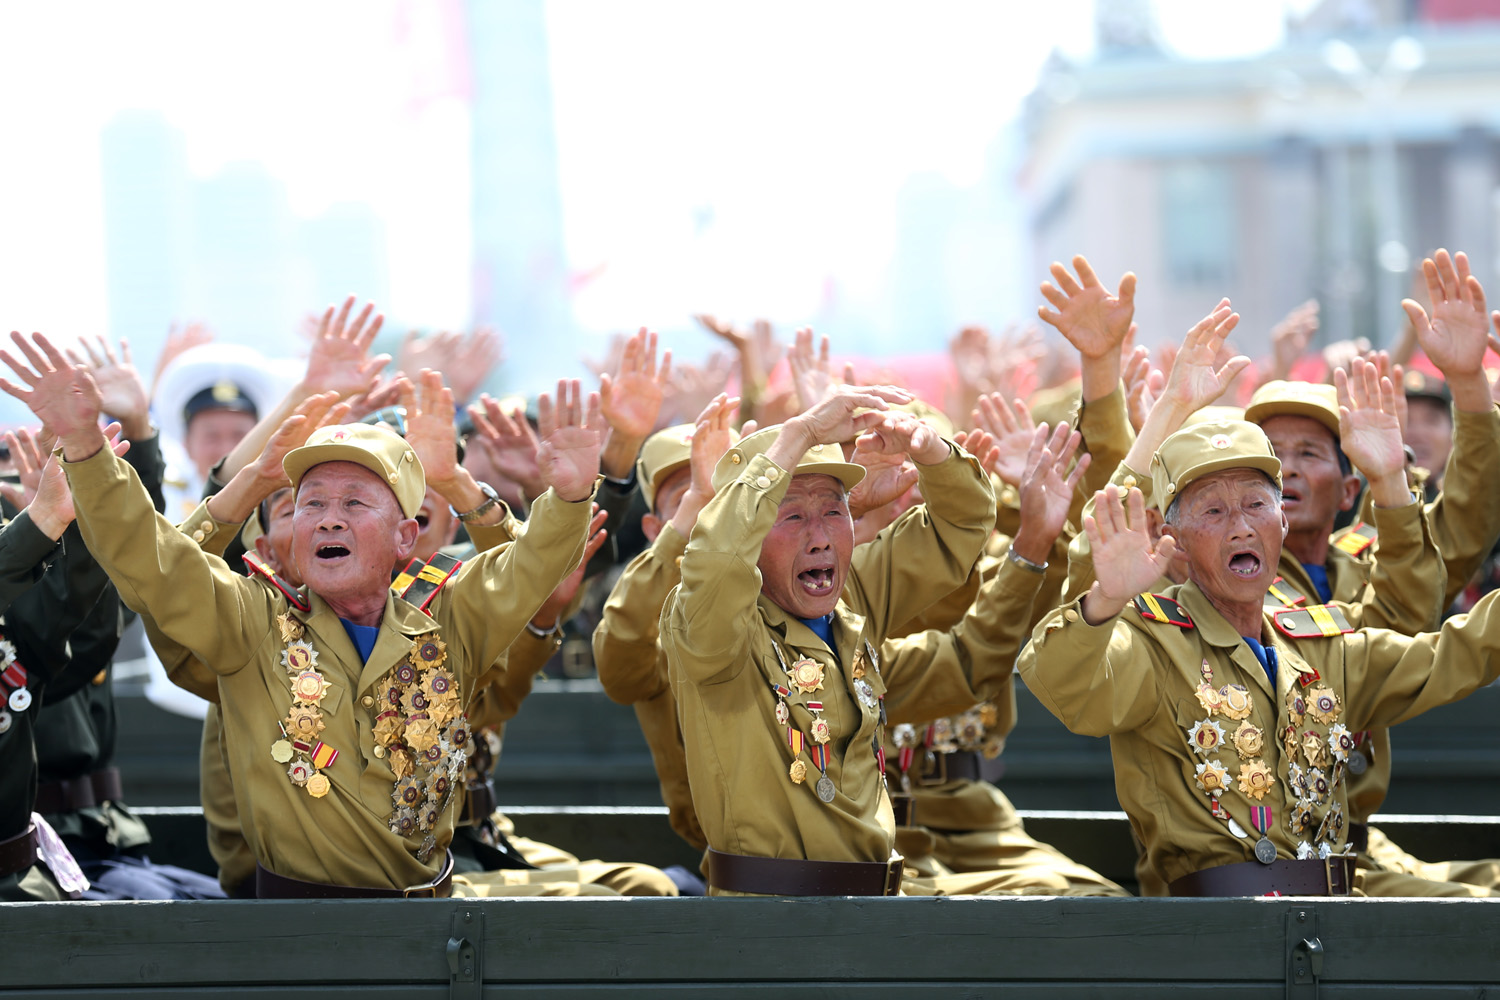 North Korean war veterans cry as they parade past their leader, Kim Jong Un, during the mass military parade celebrating the 60th anniversary of the Korean War armistice in Pyongyang, Jul. 23, 2014.